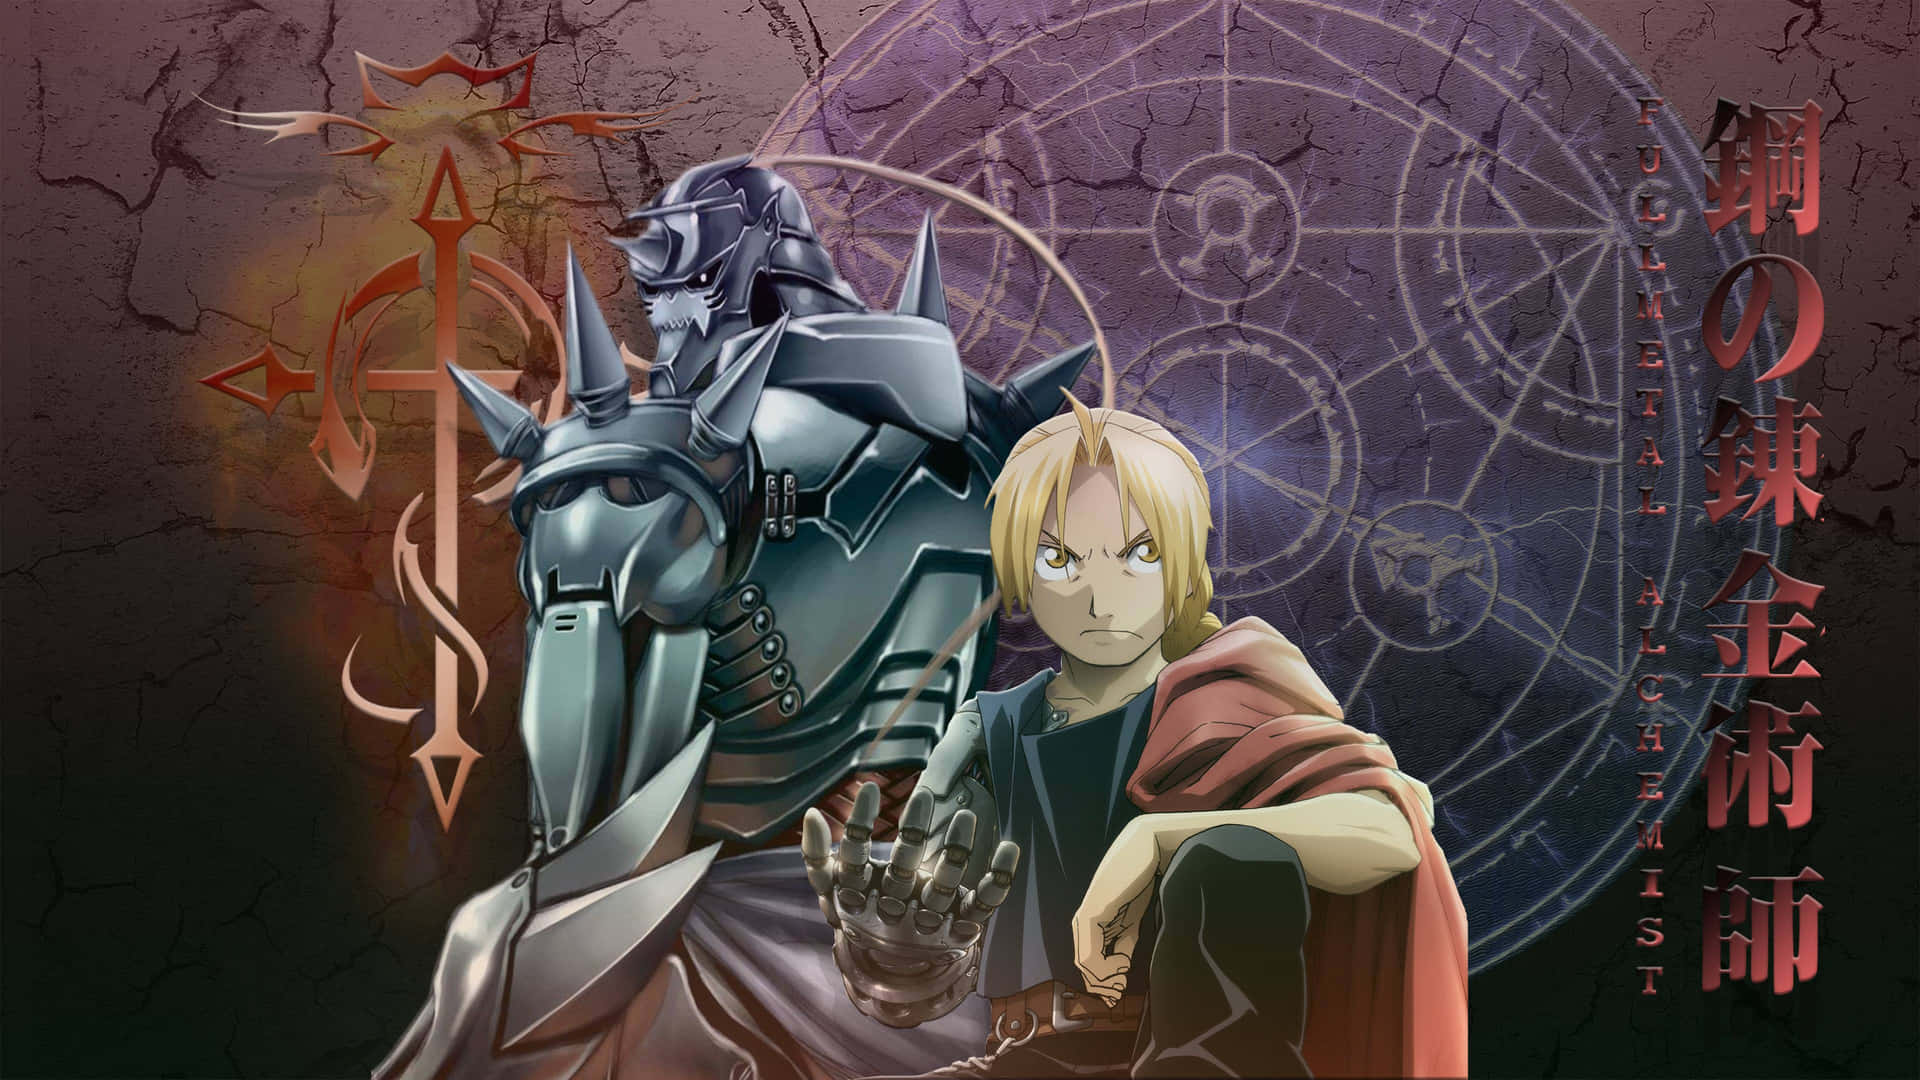 A Determined Edward Elric In Battle-ready Stance